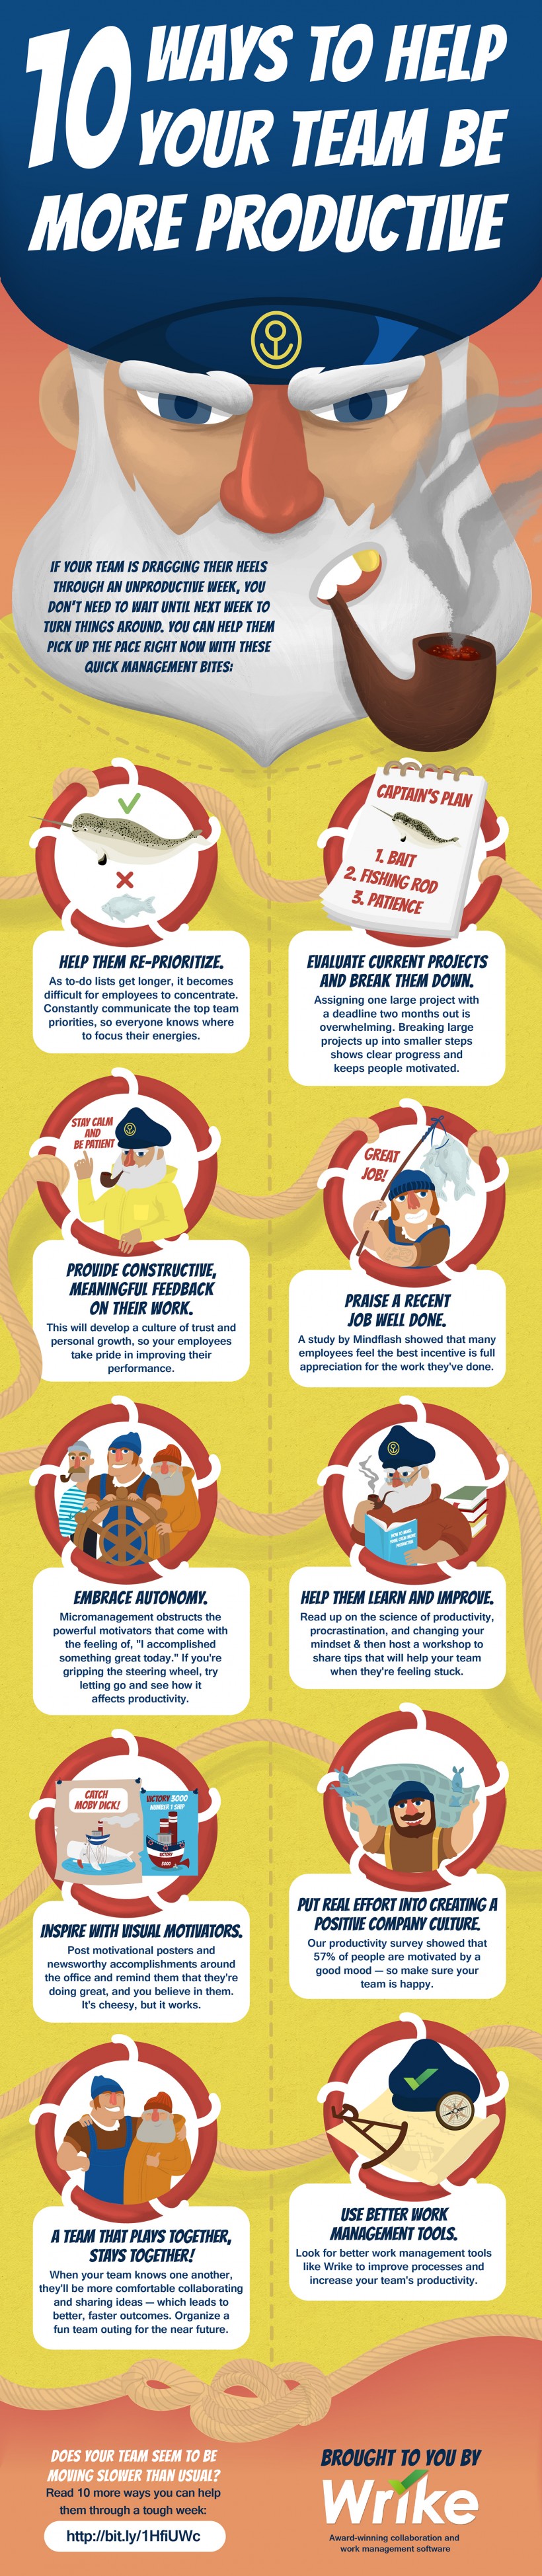 10 Ways to Make Your Team More Productive (Infographic)